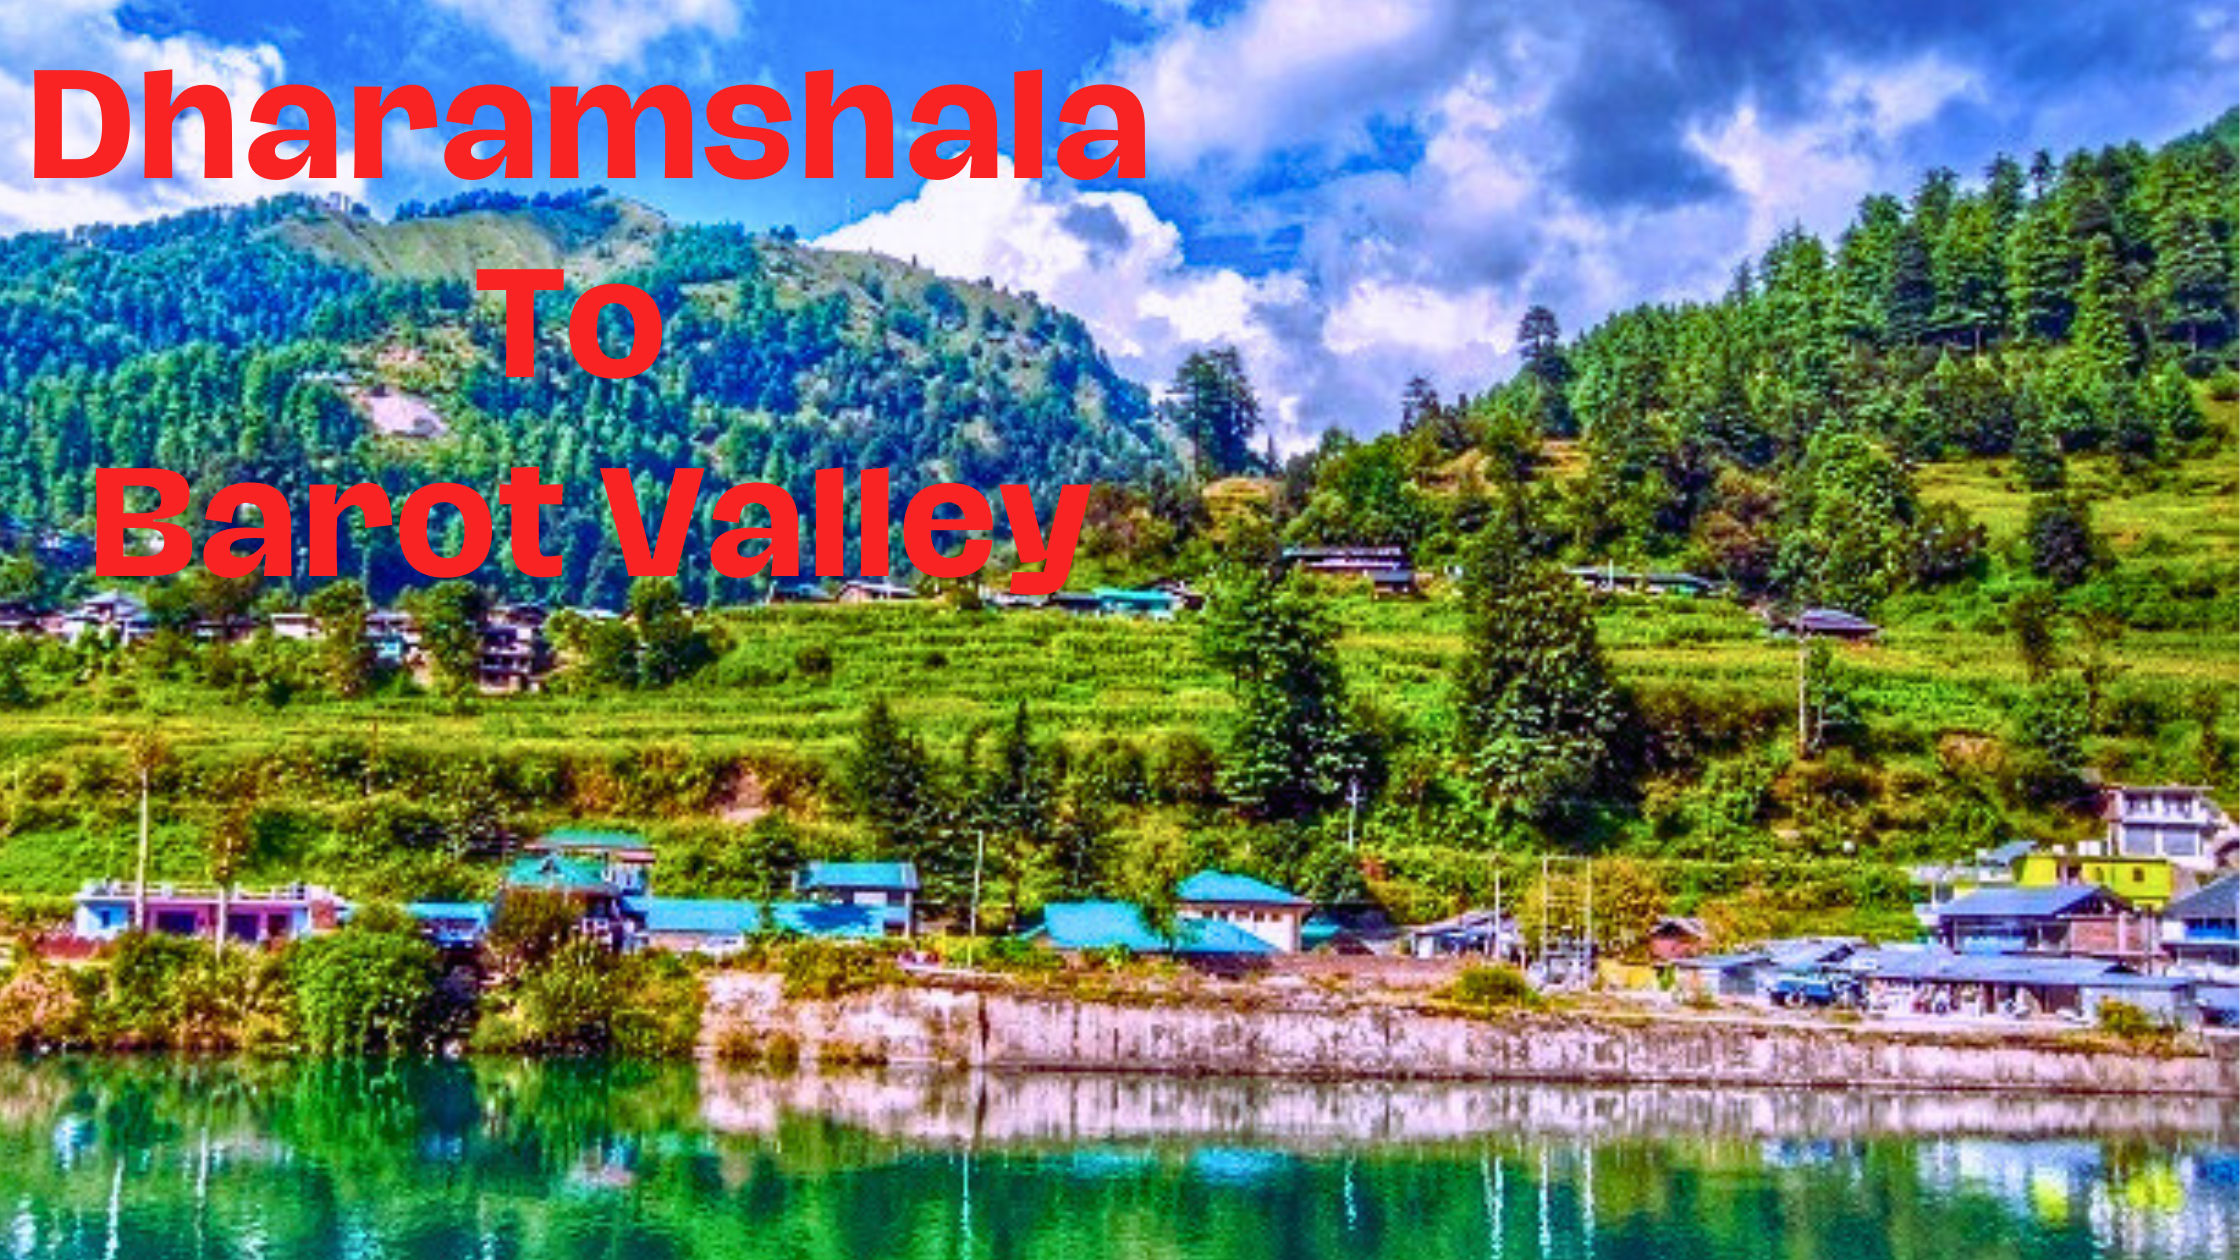 How to reach Barot valley from Dharamshala